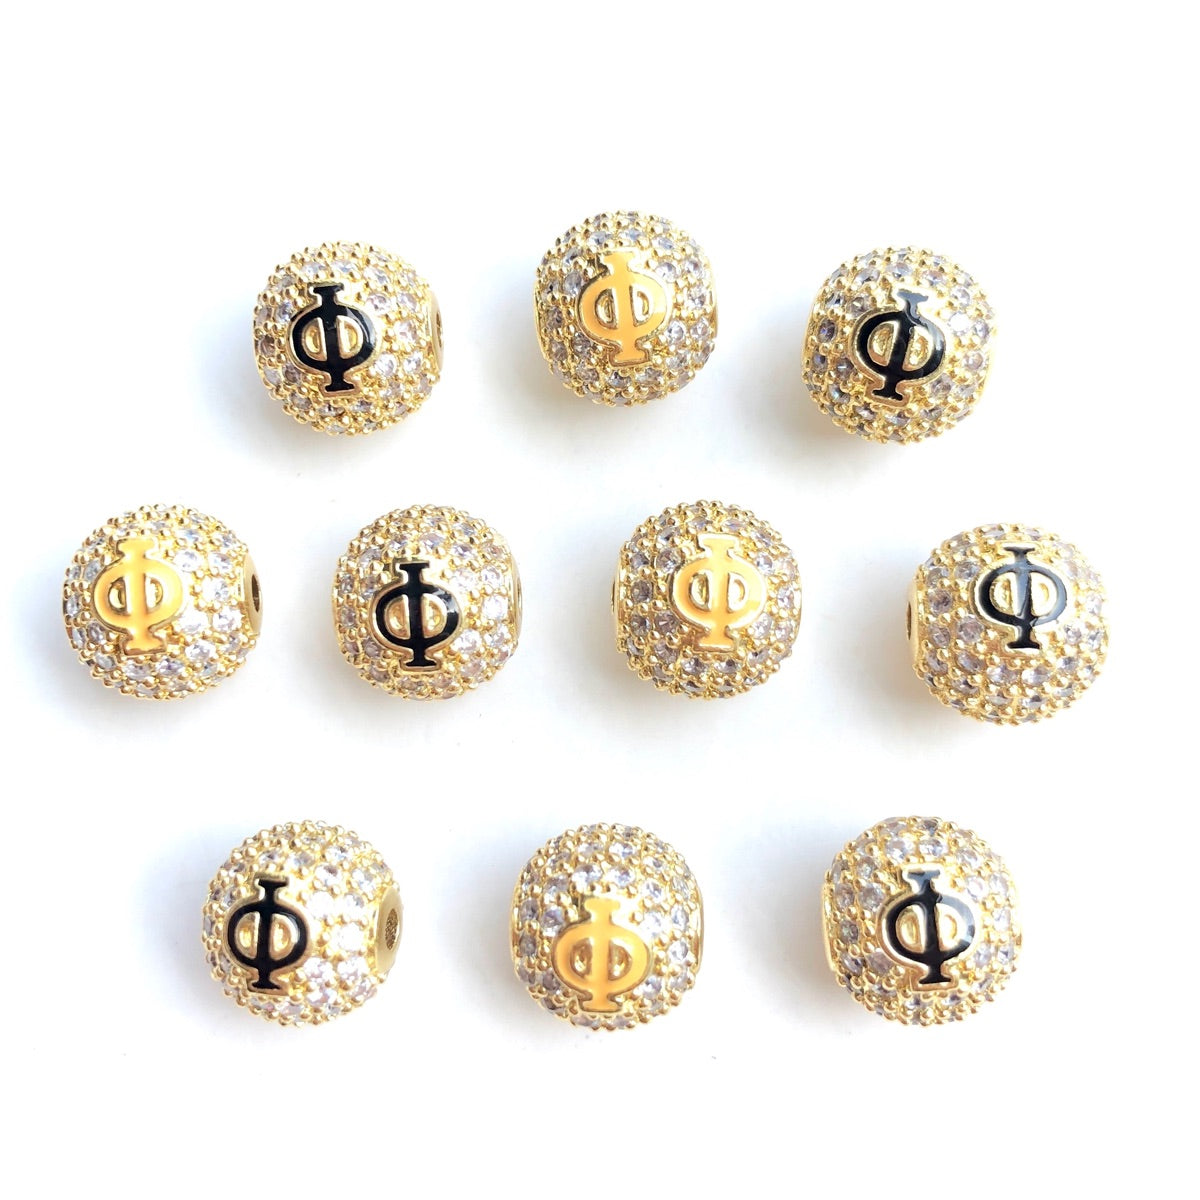 12pcs/lot 10mm Black Yellow Enamel CZ Paved A, Φ Initial Alphabet Letter Ball Spacers Beads Clear on Gold Φ CZ Paved Spacers 10mm Beads Ball Beads Greek Letters New Spacers Arrivals Charms Beads Beyond